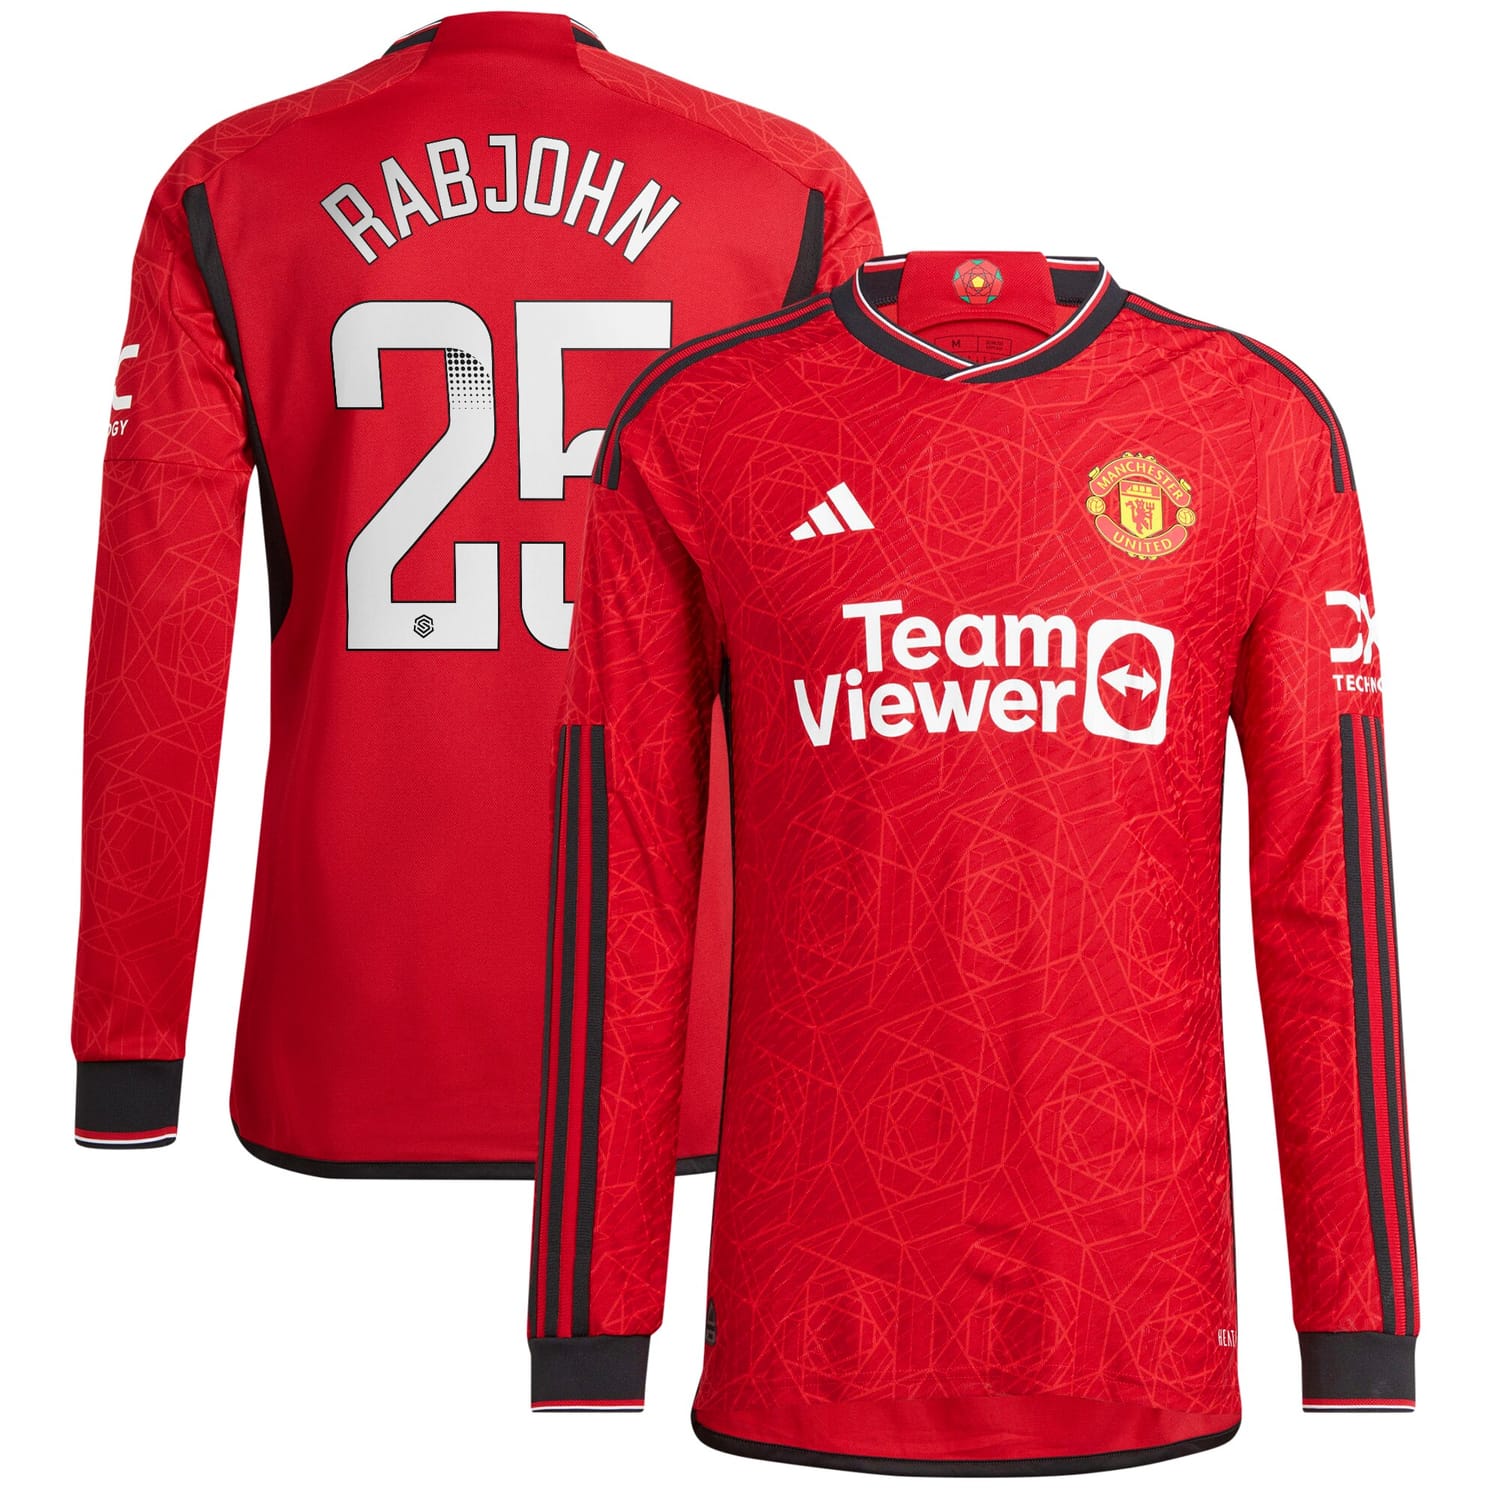 Premier League Manchester United Home WSL Authentic Jersey Shirt Long Sleeve 2023-24 player Evie Rabjohn printing for Men